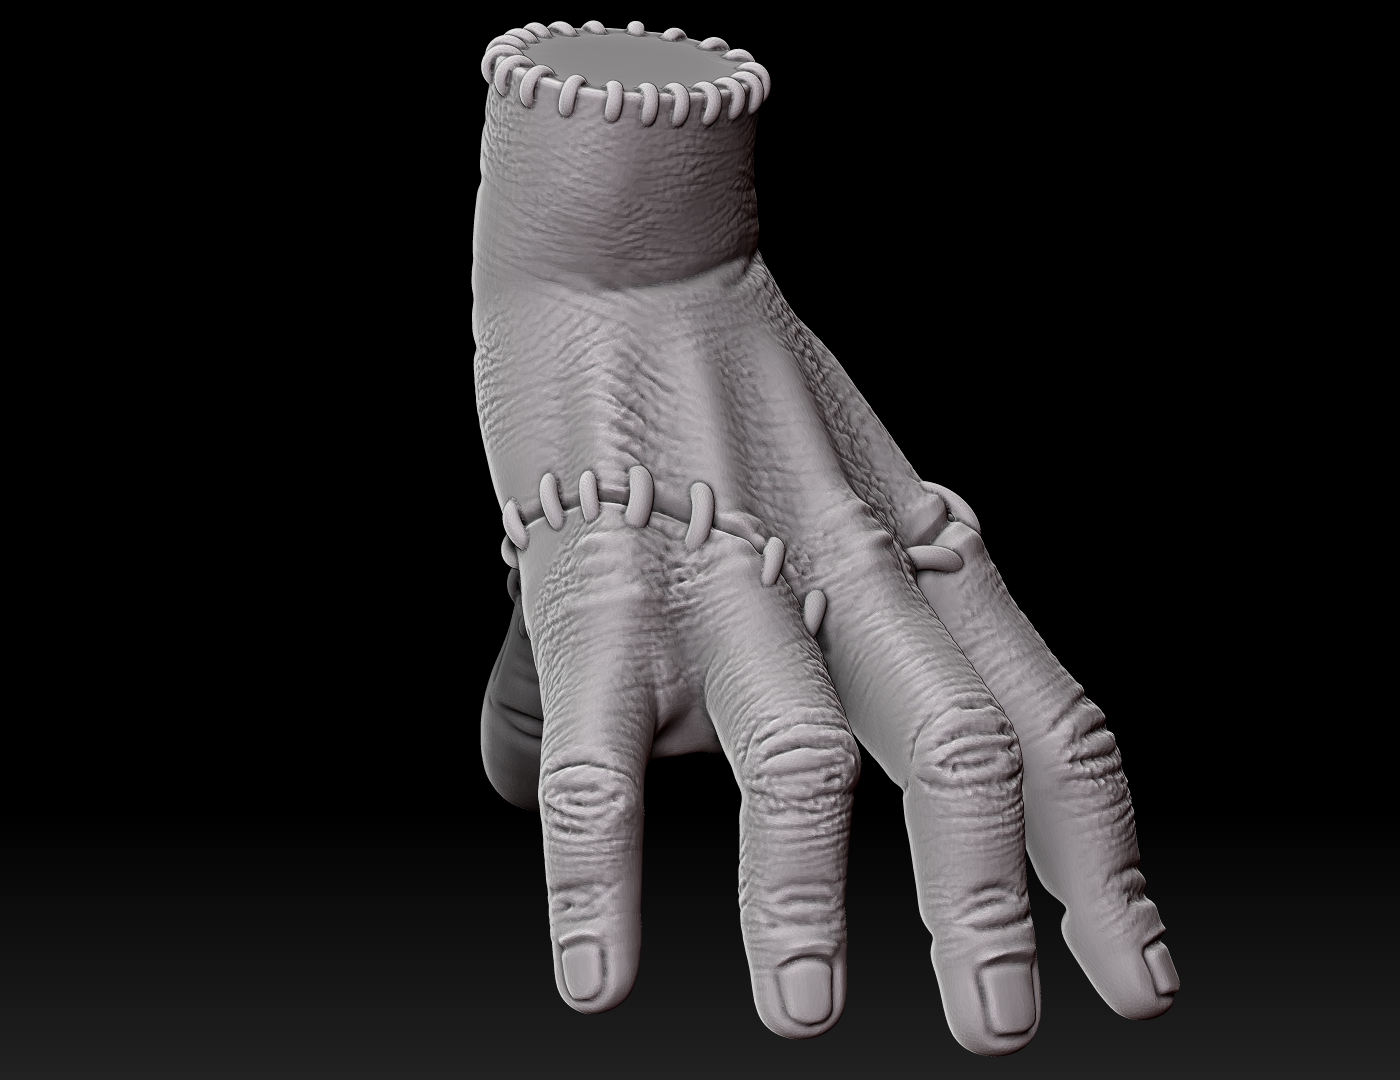 Thing, the hand from Addams Family